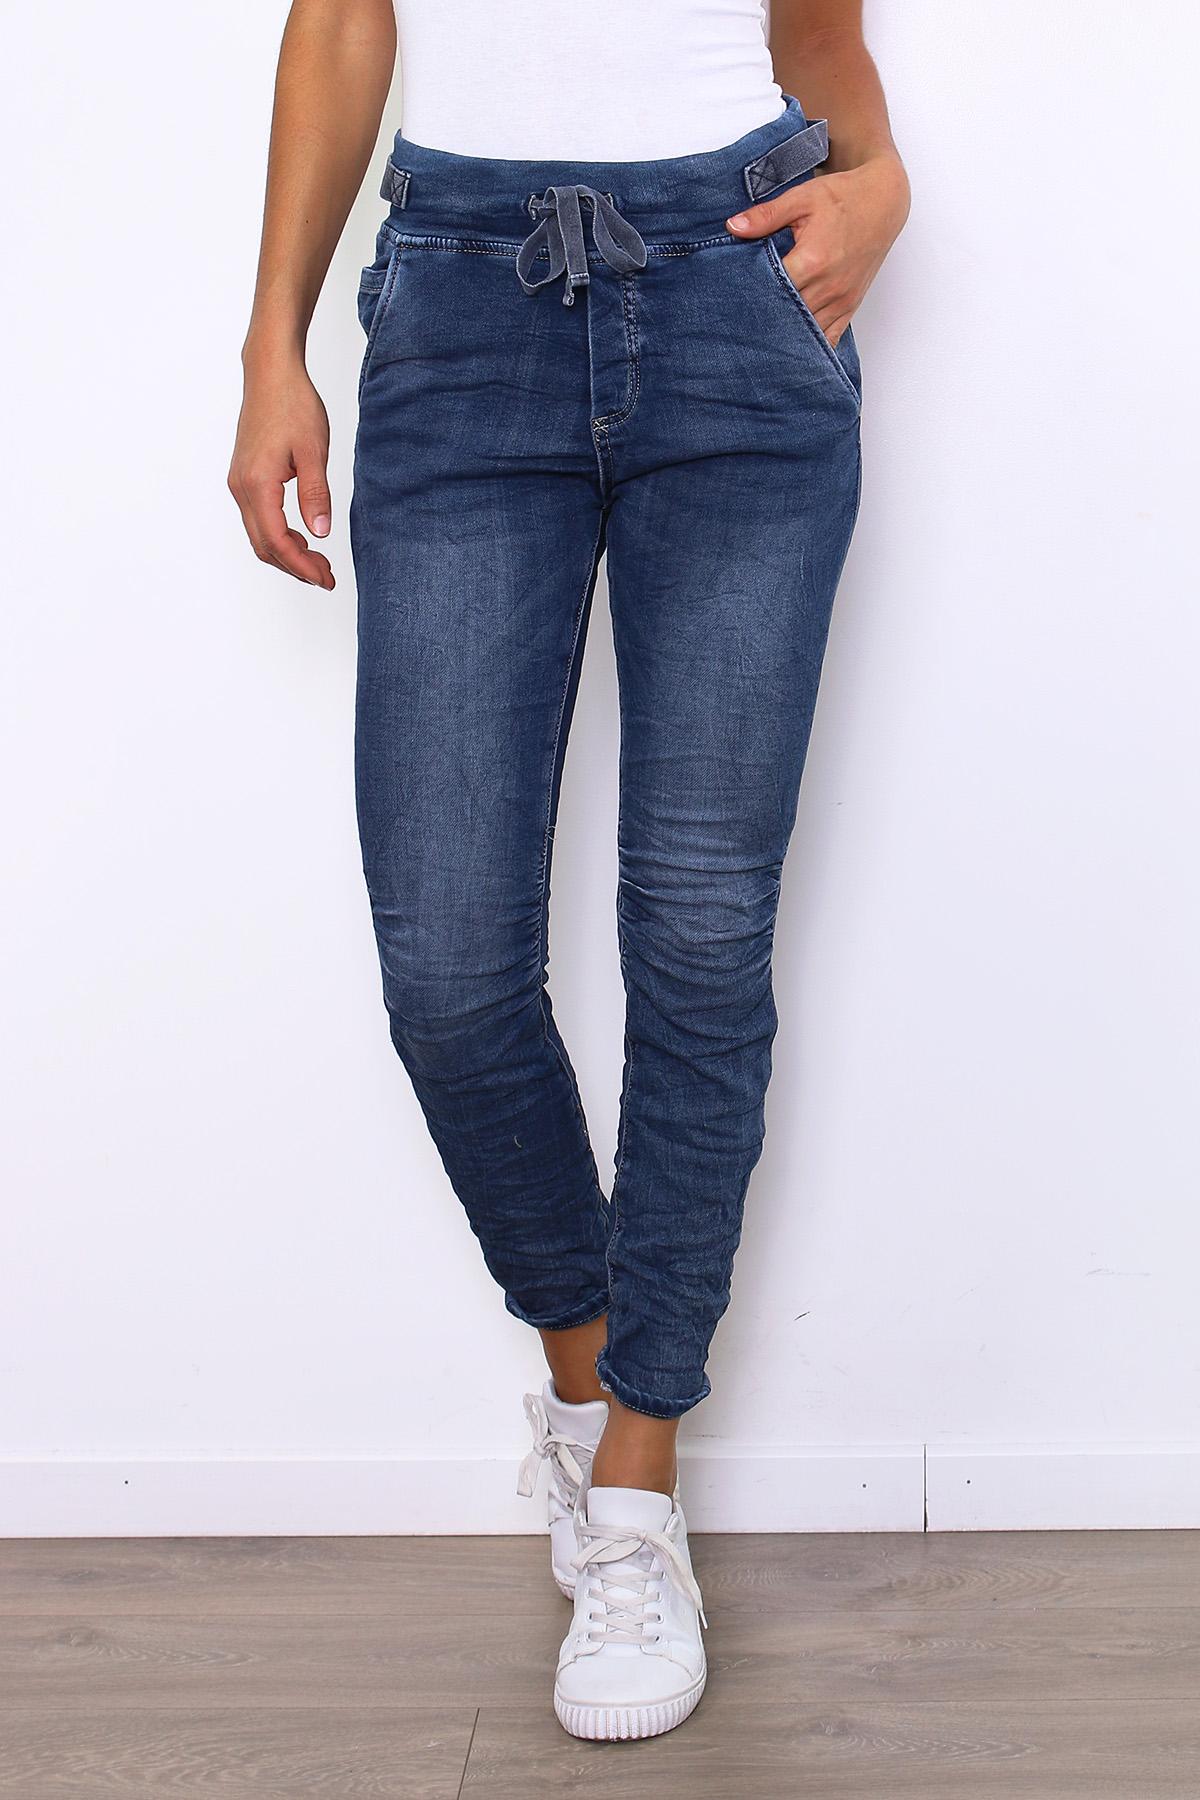 melly and co jean joggers